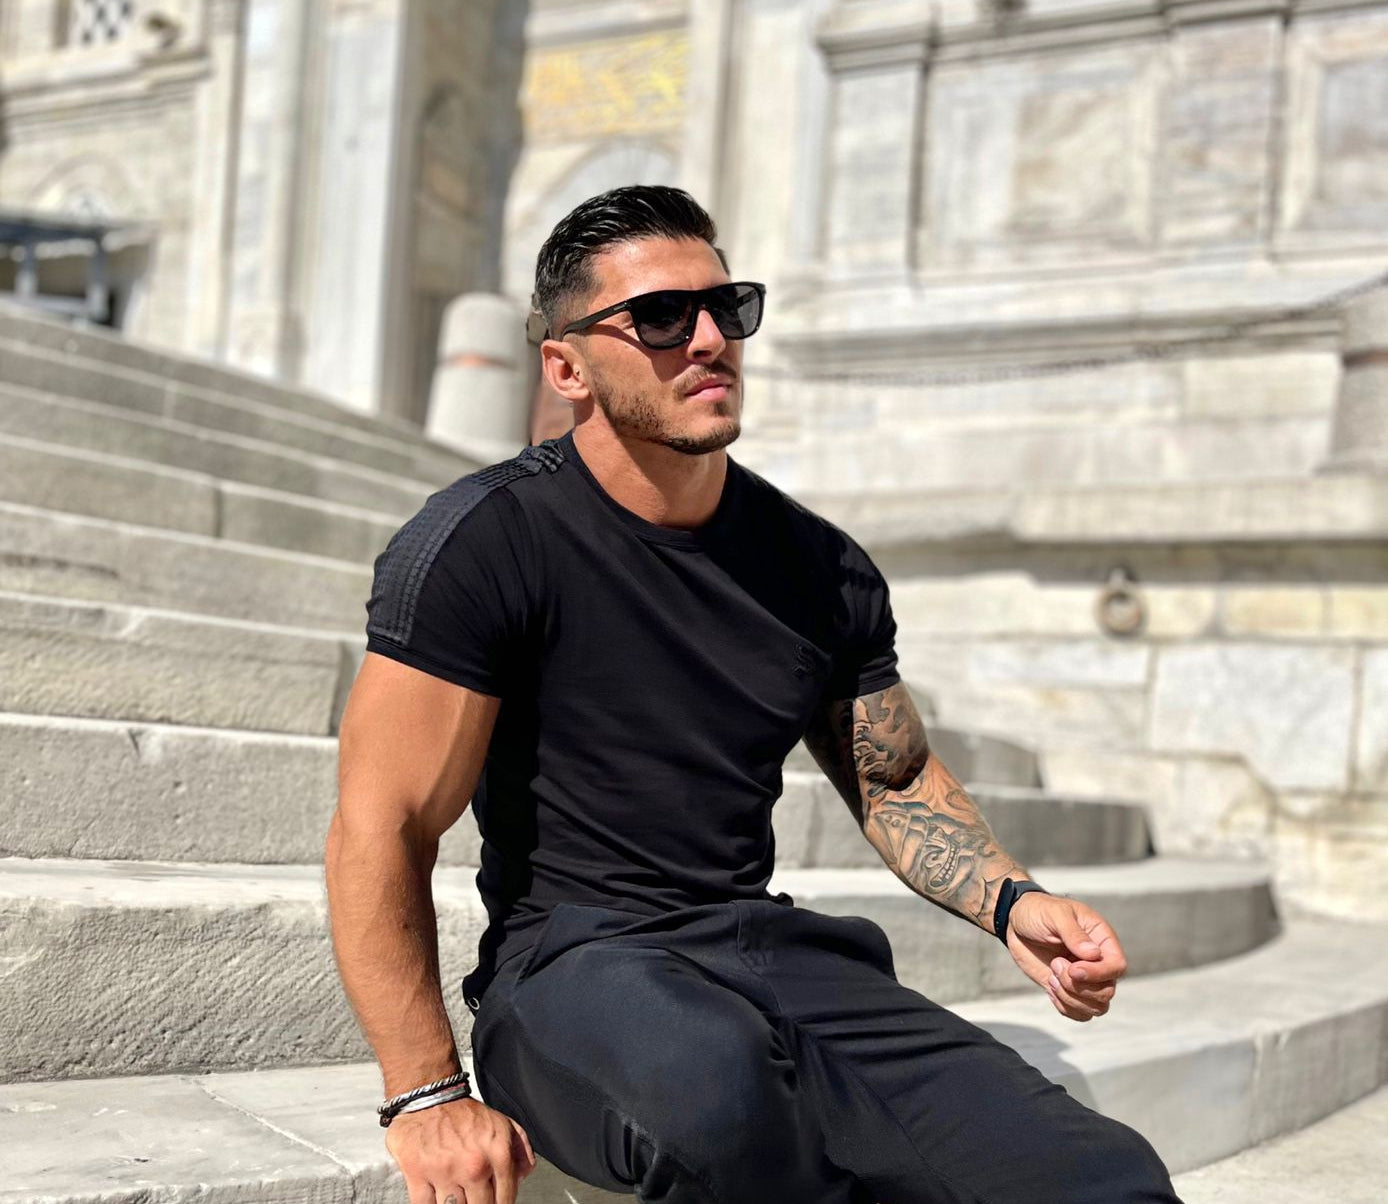 Cobra - Black T-Shirt for Men (PRE-ORDER DISPATCH DATE 25 DECEMBER 2021) - Sarman Fashion - Wholesale Clothing Fashion Brand for Men from Canada